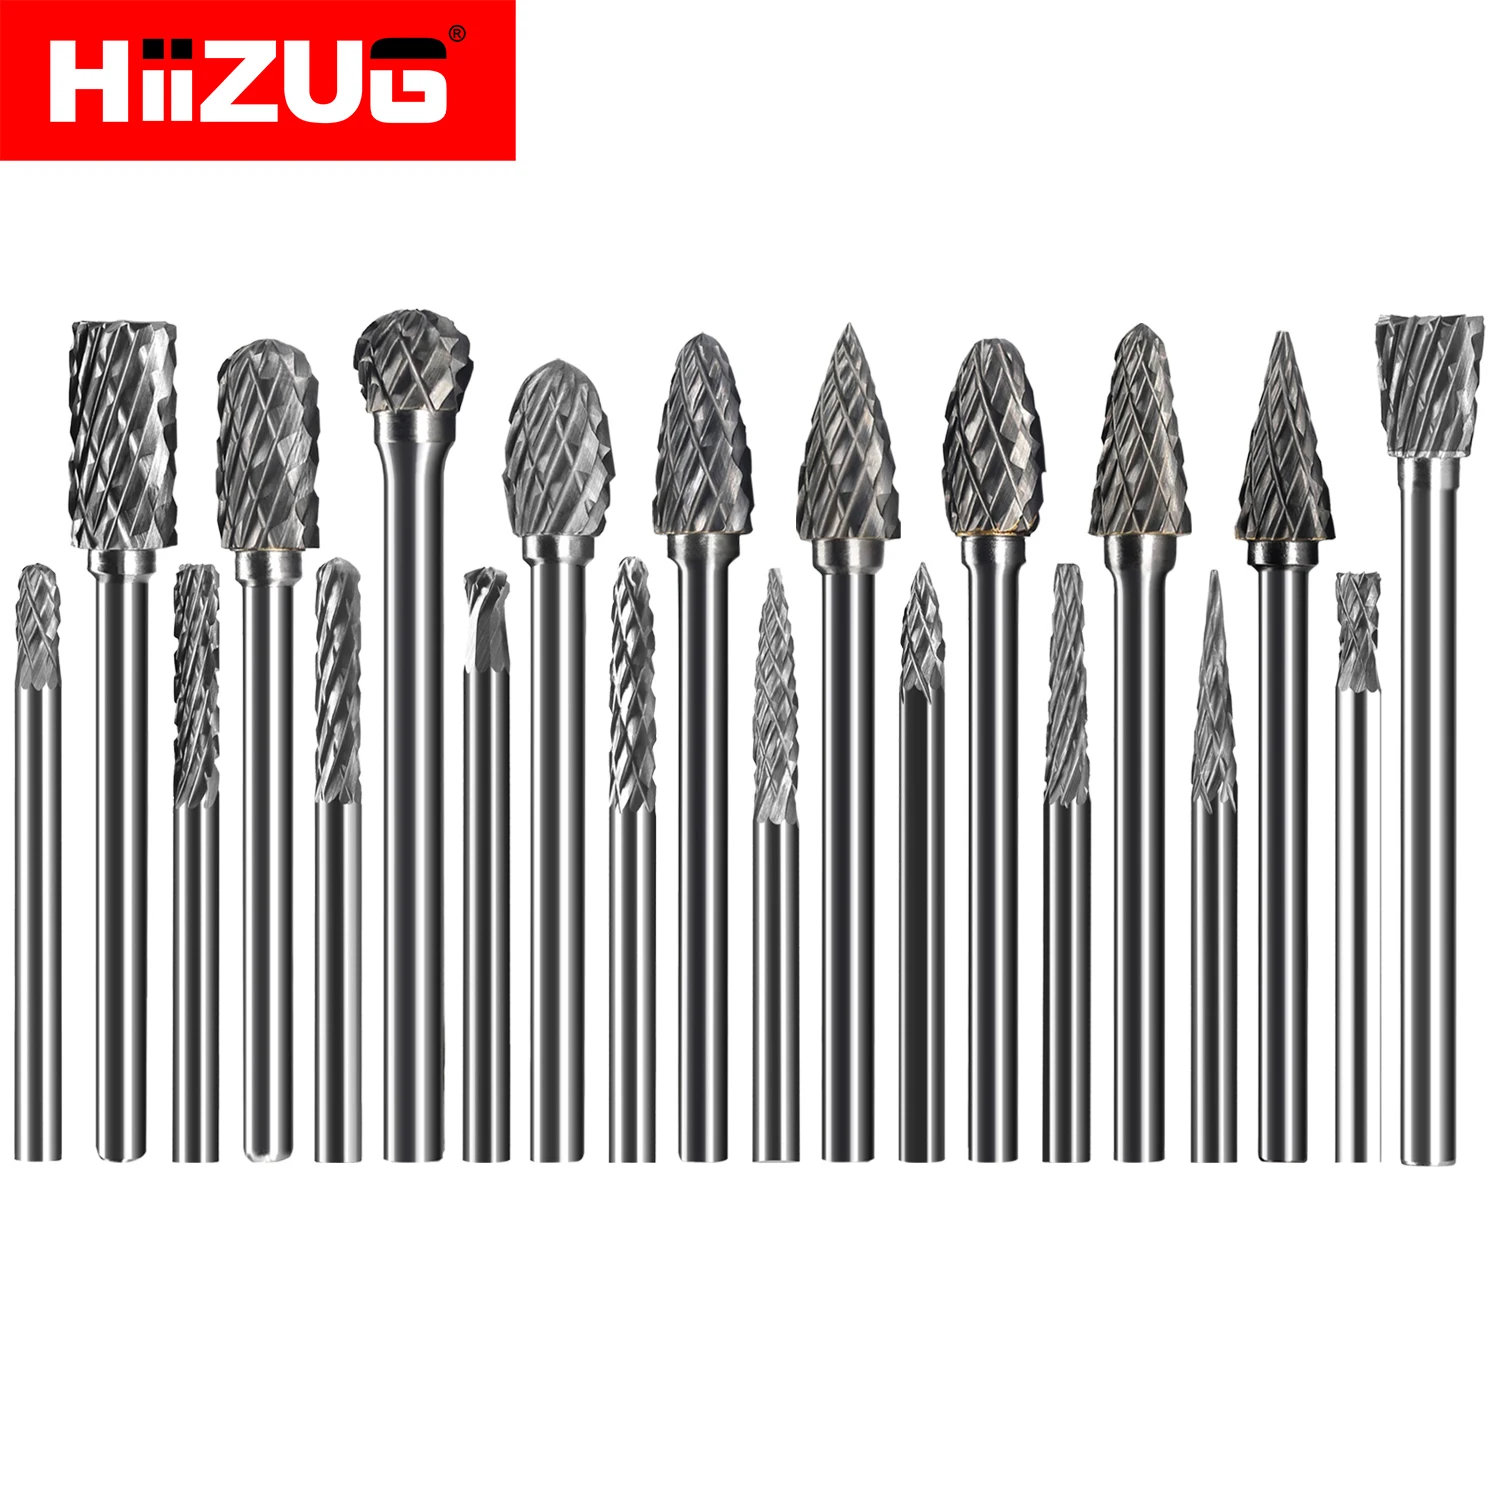 Carbide Die Drill Grinder Rotary Files Mini Burrs Double Cut for Demel Wood Metal Carving Engraving Drilling 1/8 inch Diameter rotary file carbide burr sj 1 for metal wood die grinder bit double cut 1 4 inch shank abrasive carving working